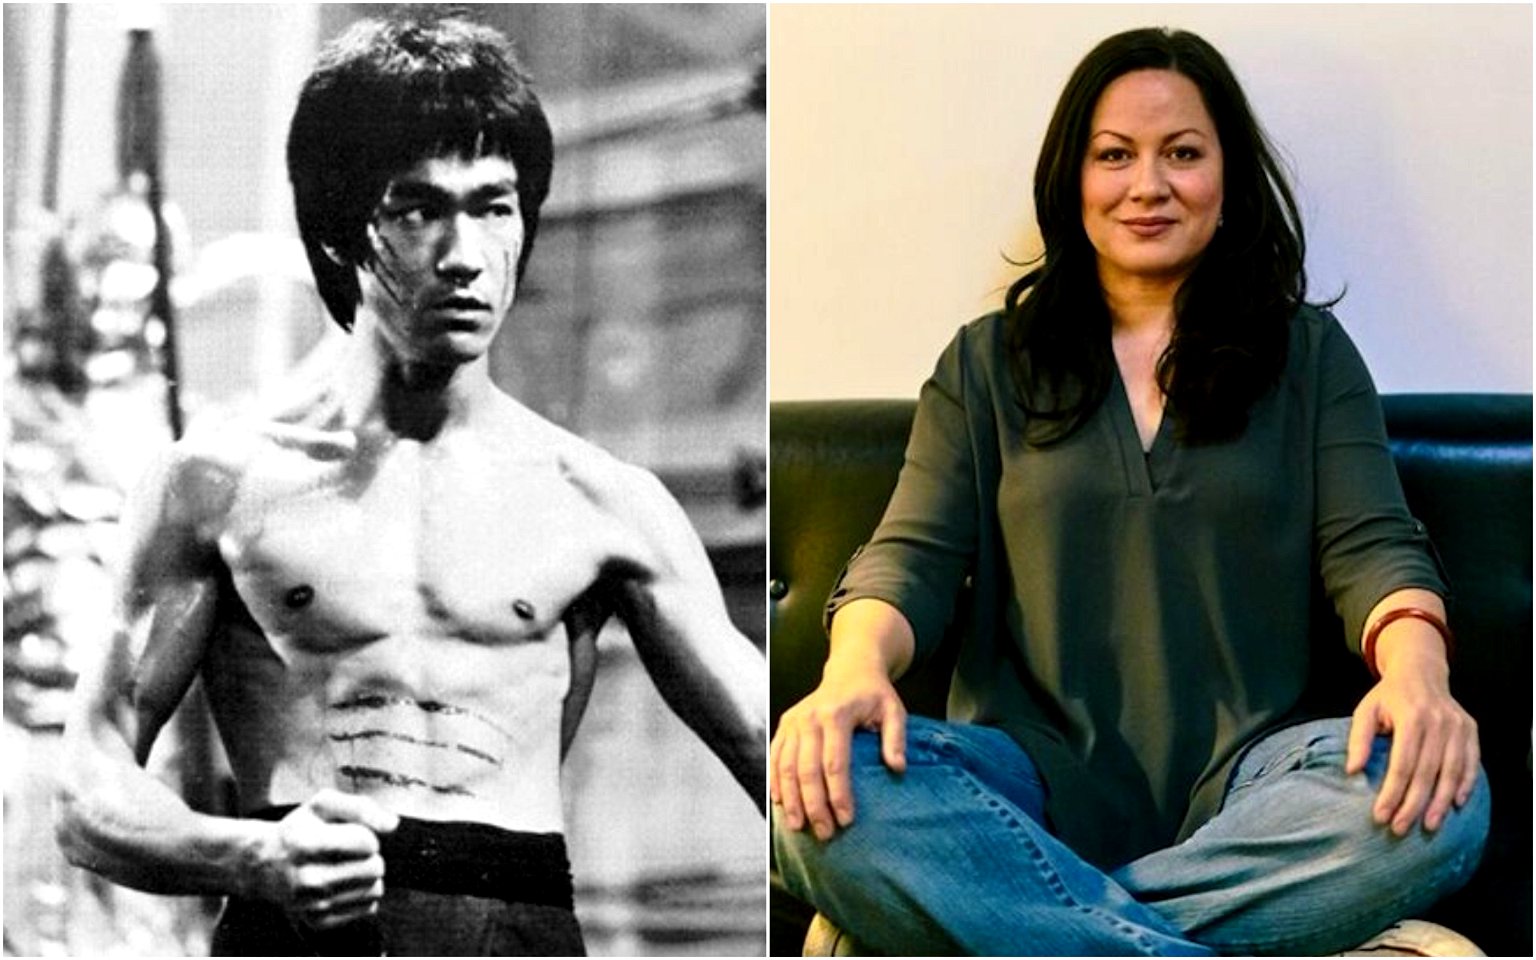 Bruce Lee Once Had a Dream That Hollywood Destroyed, Now His Daughter is Bringing it Back to Life